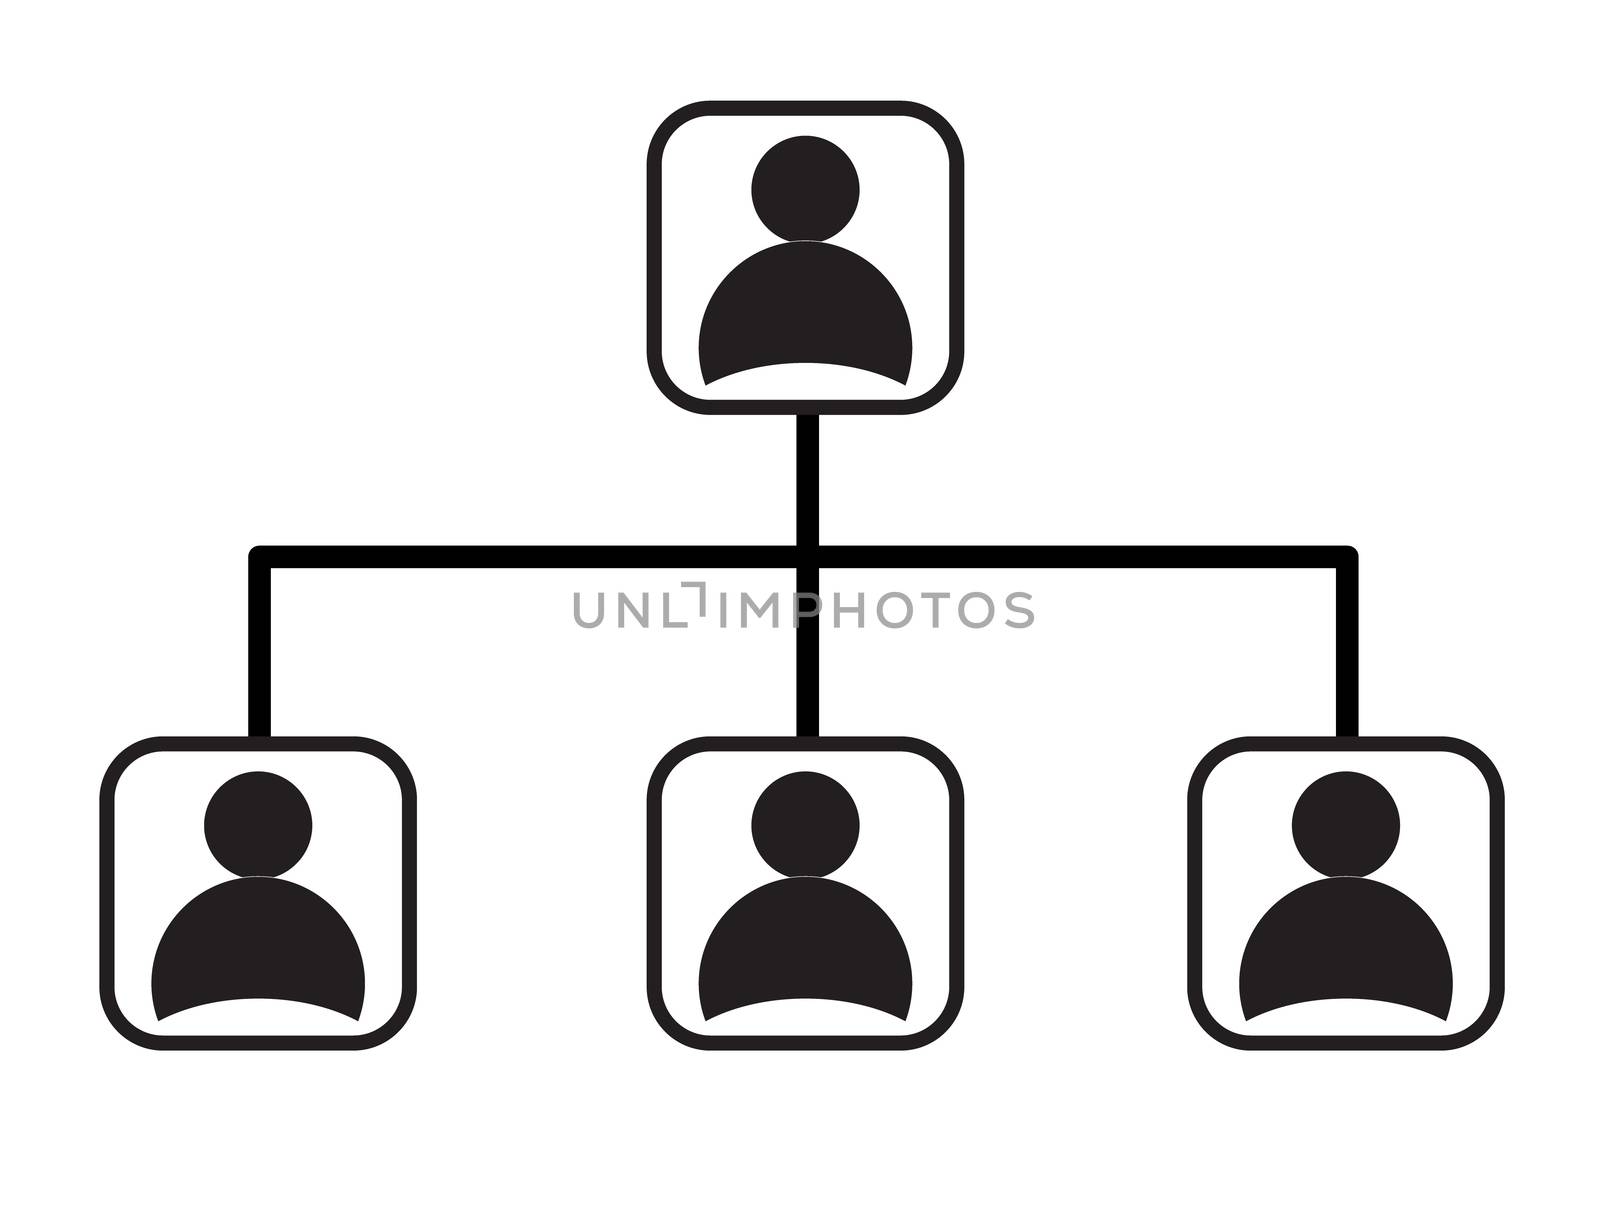 business management network hierarchy icon on white background. flat style design. social network sign.